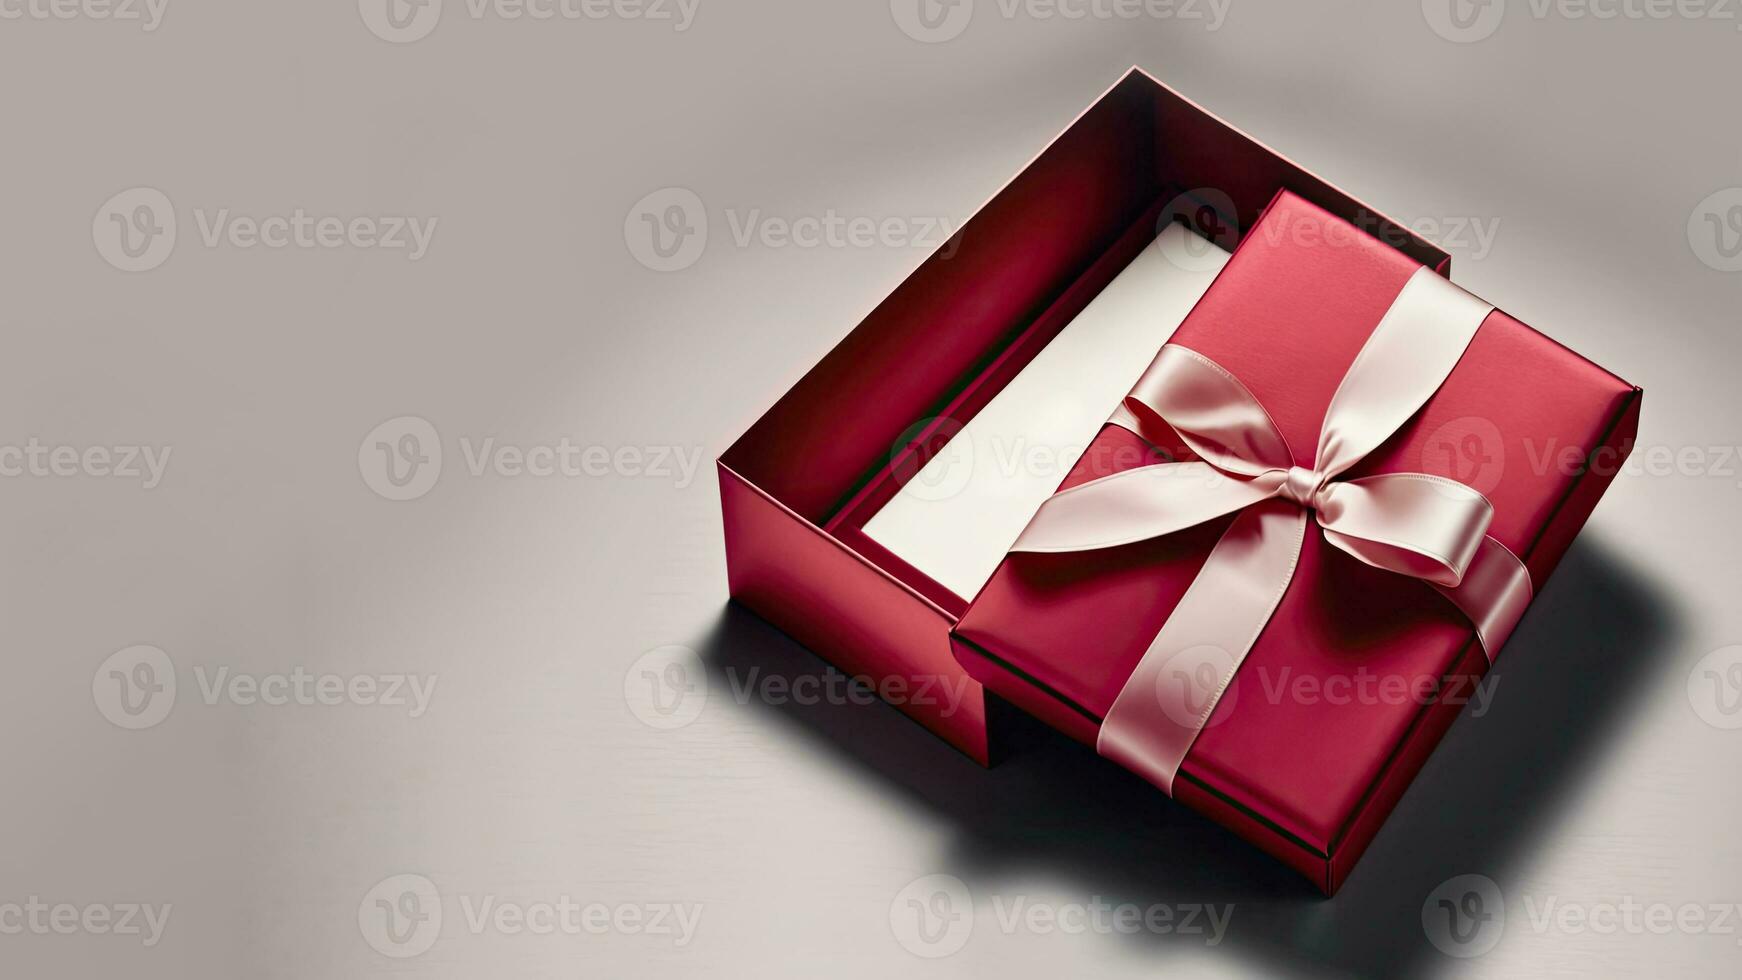 3D Render Of Open Gift Box With Silk Bow Ribbon On Grey Background And Copy Space. photo